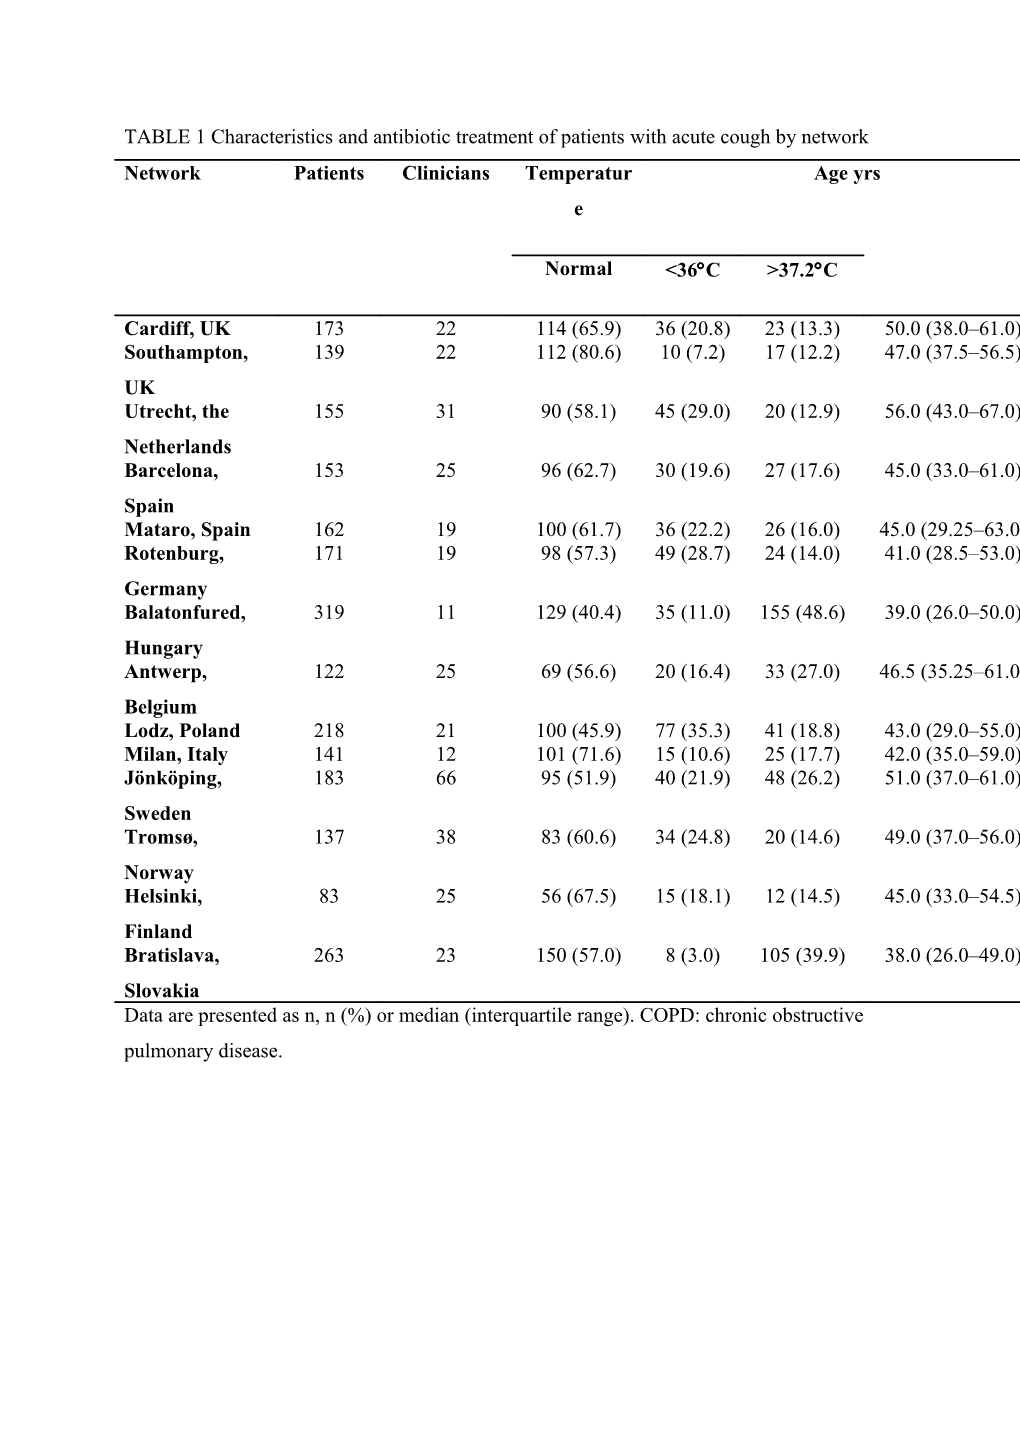 TABLE 1 Characteristics and Antibiotic Treatment of Patients with Acute Cough by Network